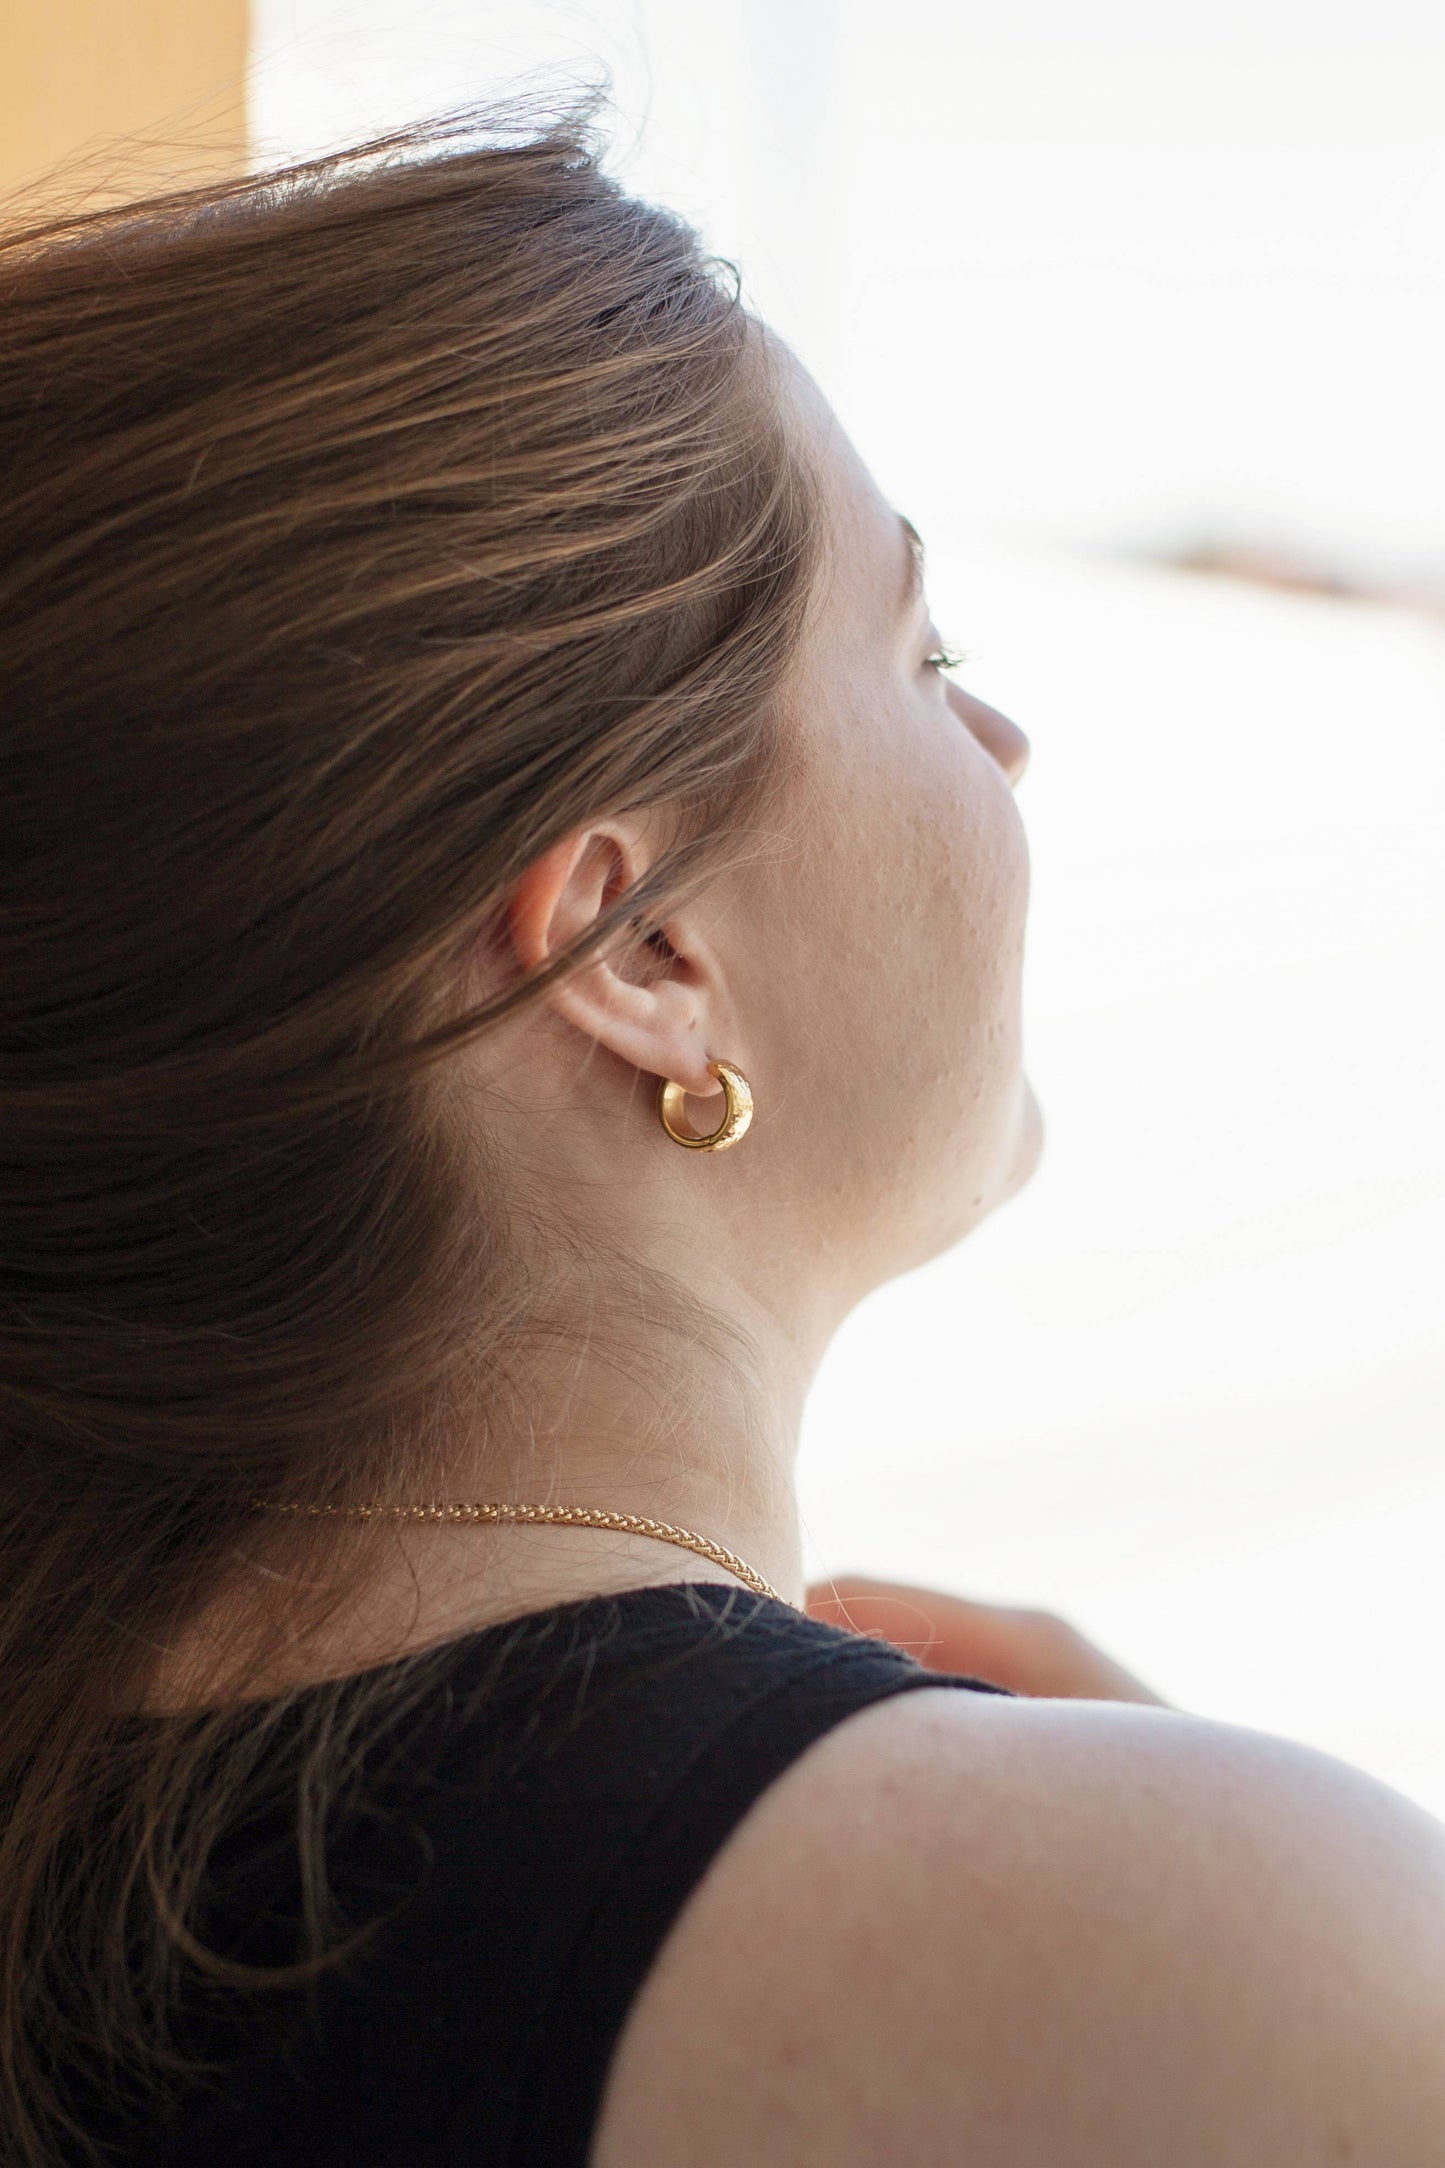 A photo of a model wearing the earring, showcasing the earring size and shape on the ear.